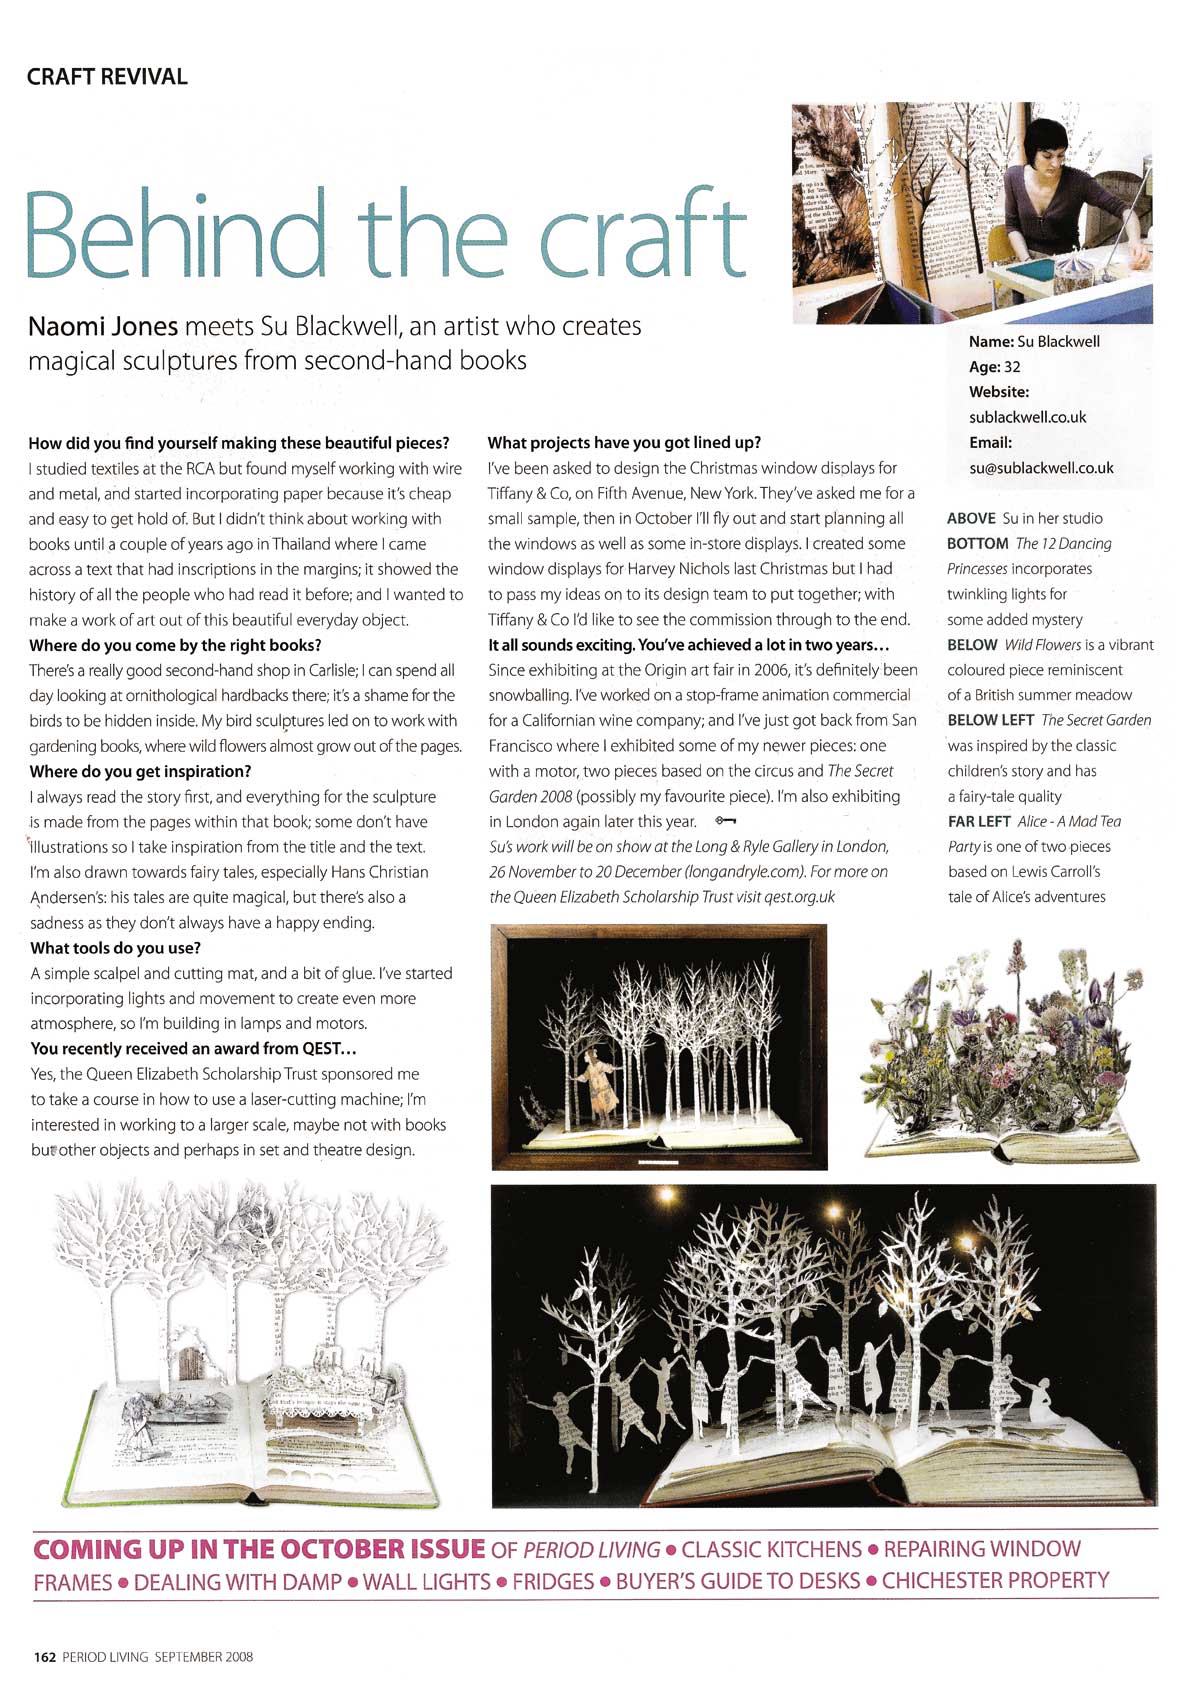 CraftReview-PeriodLivingSeot2008